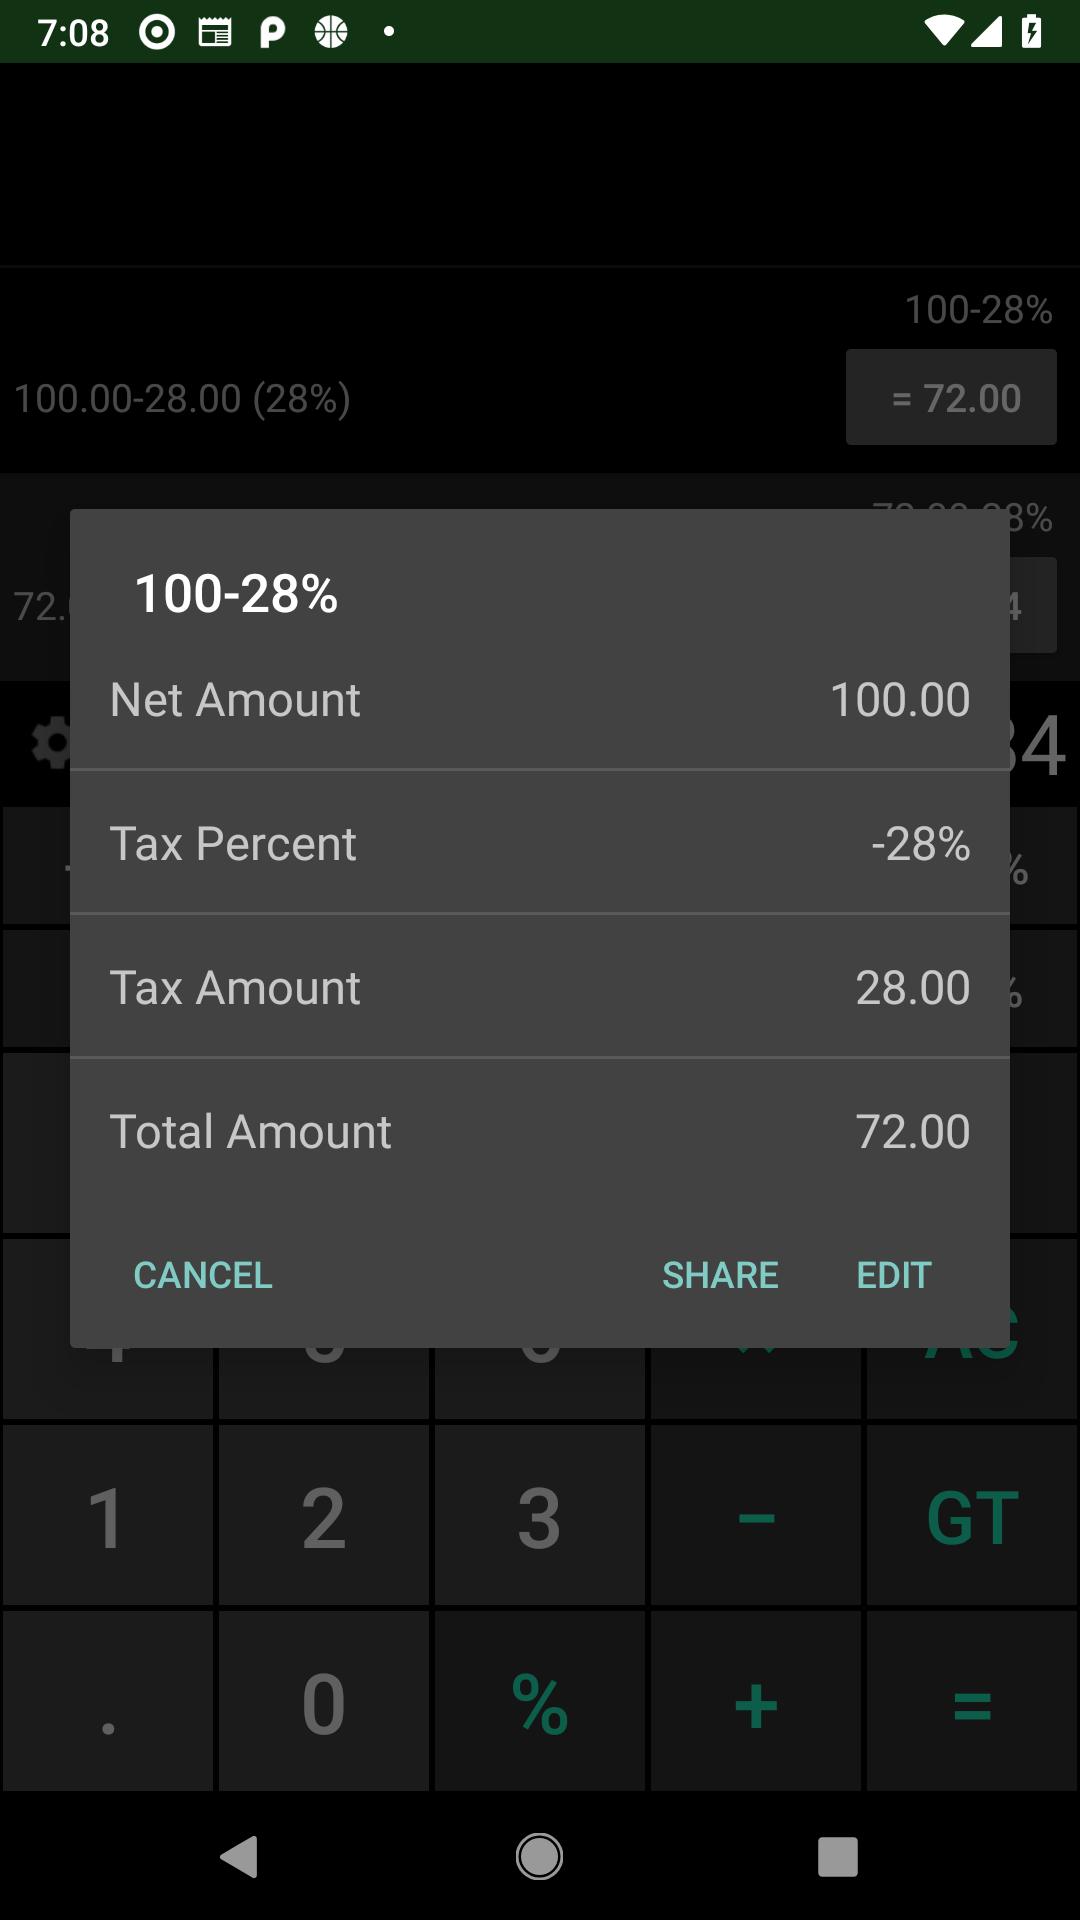 Calculator Tax Vat Gst And Sales For Android Apk Download - 2019 sales calendar roblox